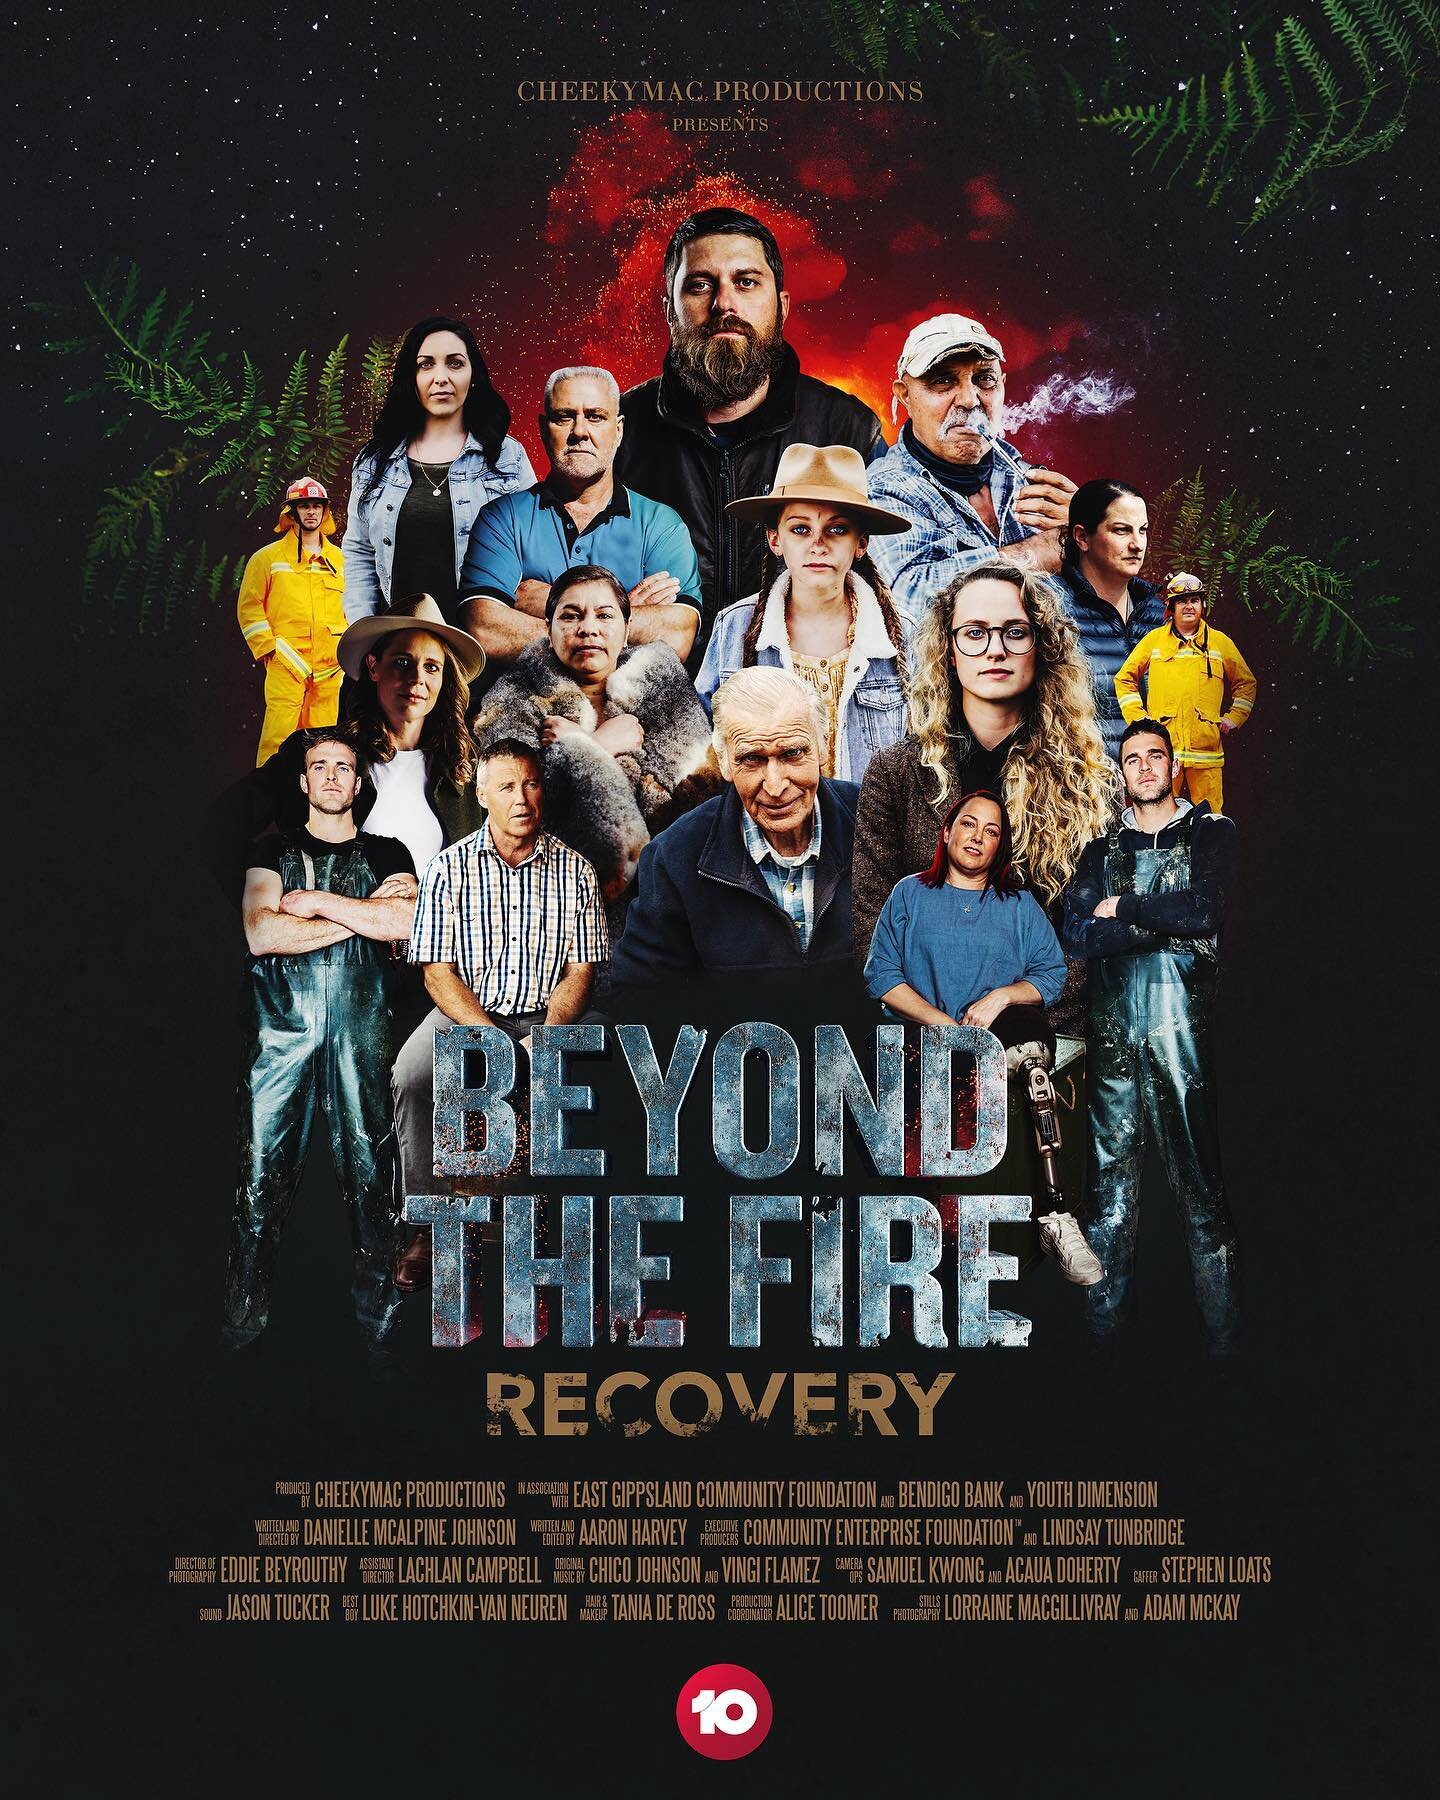 Through a lens of hope, &lsquo;Beyond The Fire: Recovery&rsquo; gives a voice to the triumphant grassroots story of communities banding together against all odds two years after the Black Summer bushfire crisis.

Premiering Saturday February 19th at 